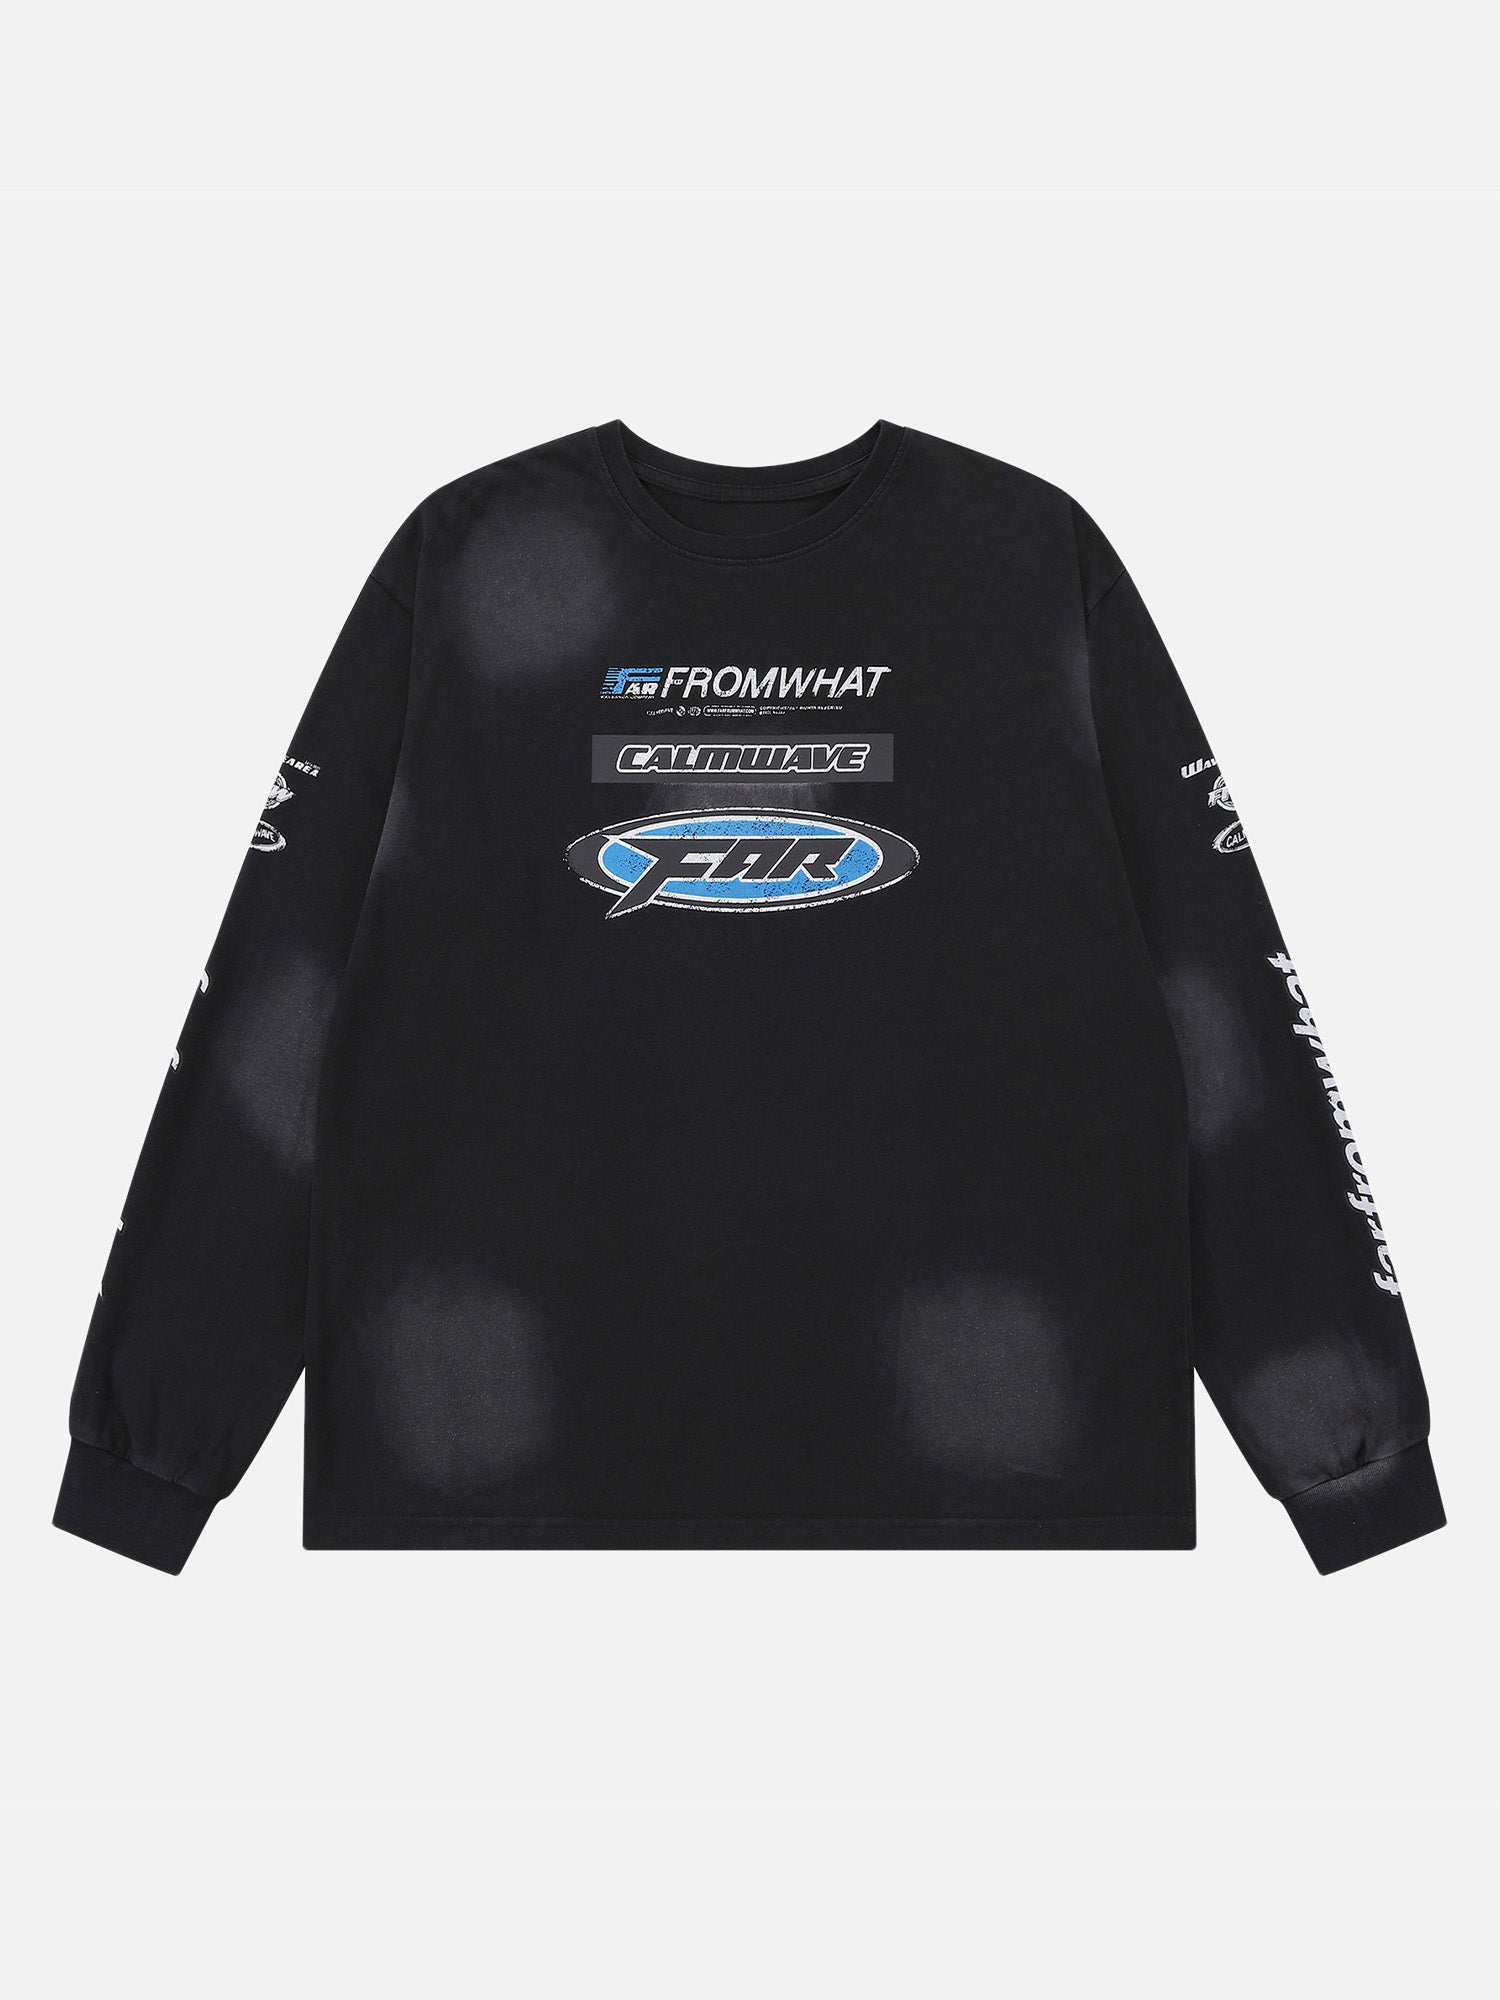 Thesupermade Washed And Distressed Long-sleeved Sweatshirt